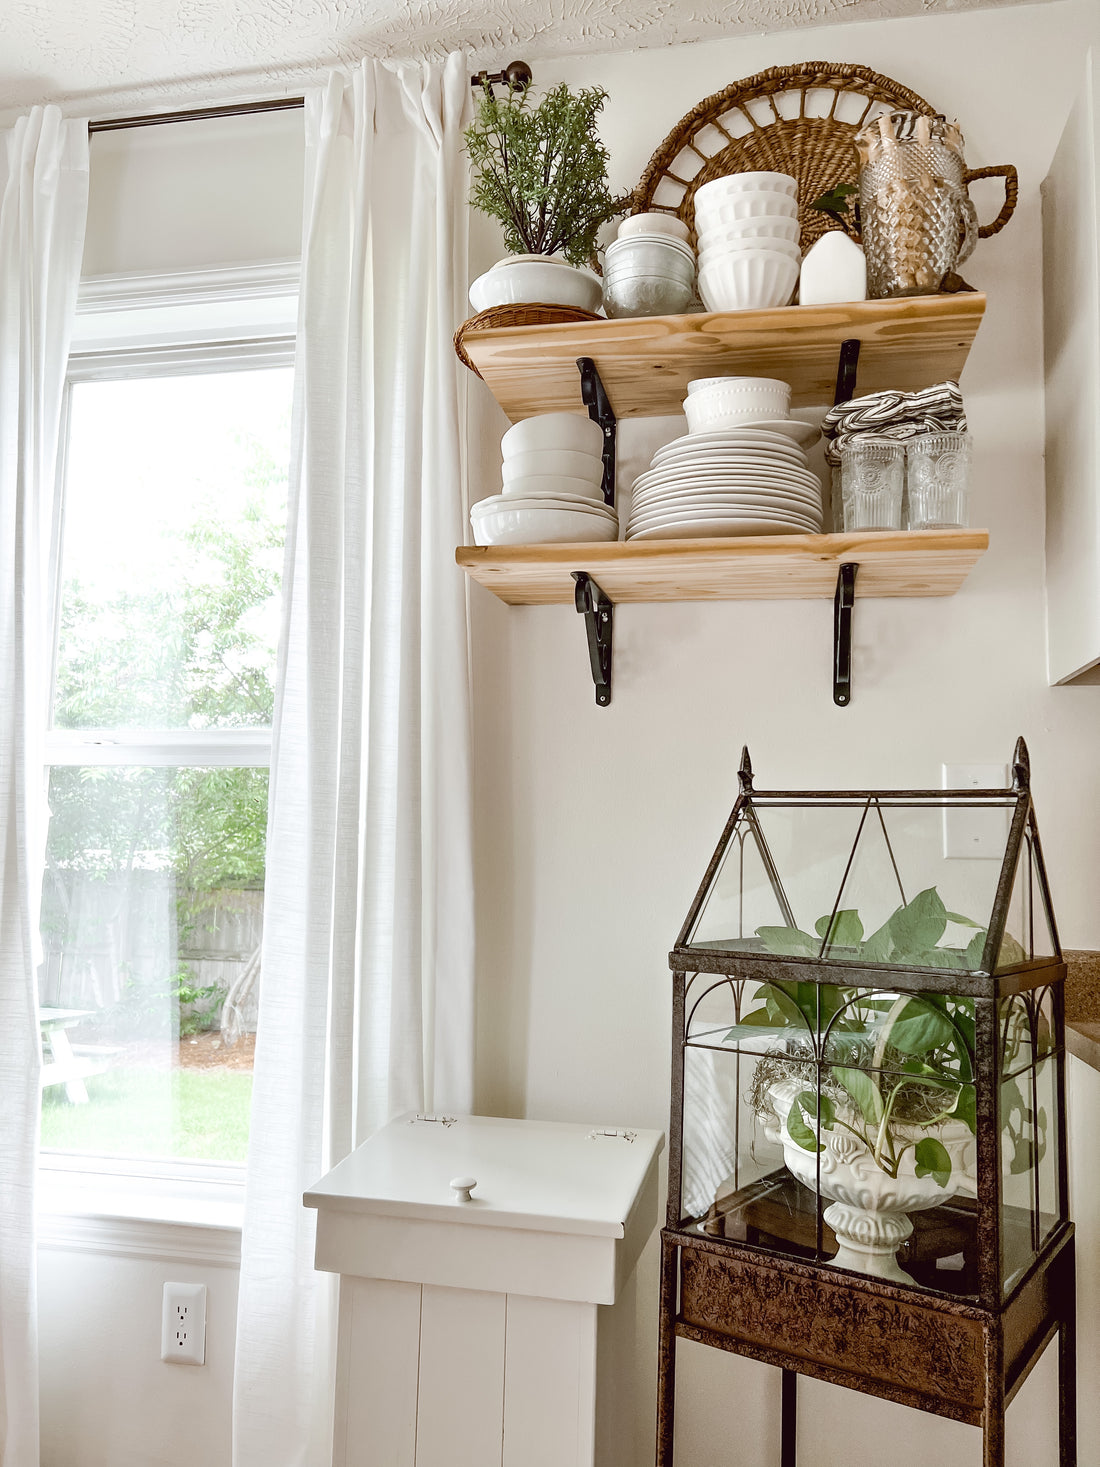 Small Cottage Kitchen Styling: Open Shelving